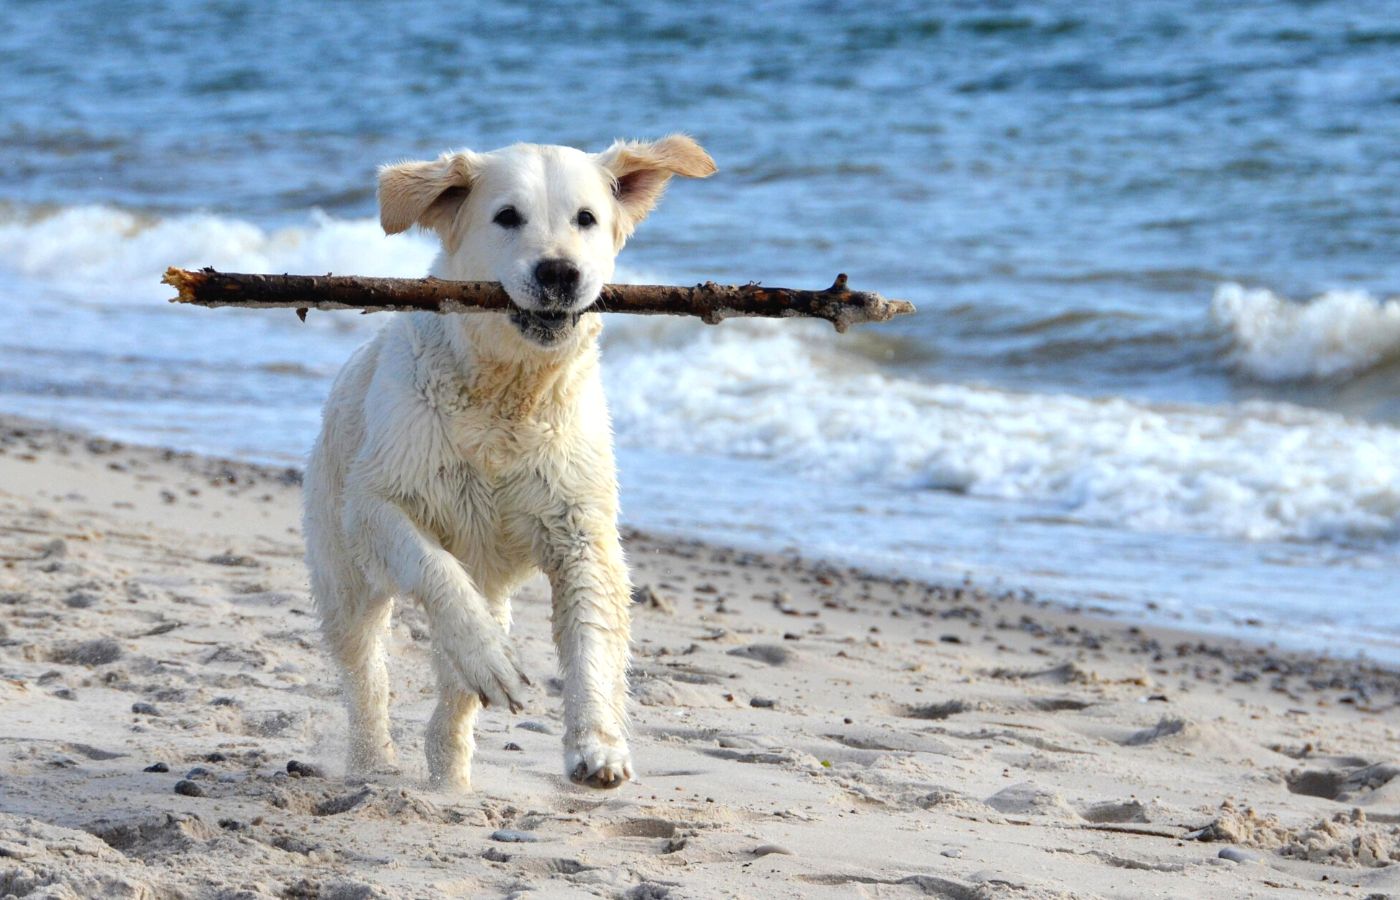 A puppy dog with a stick in its mouth running down the beach.